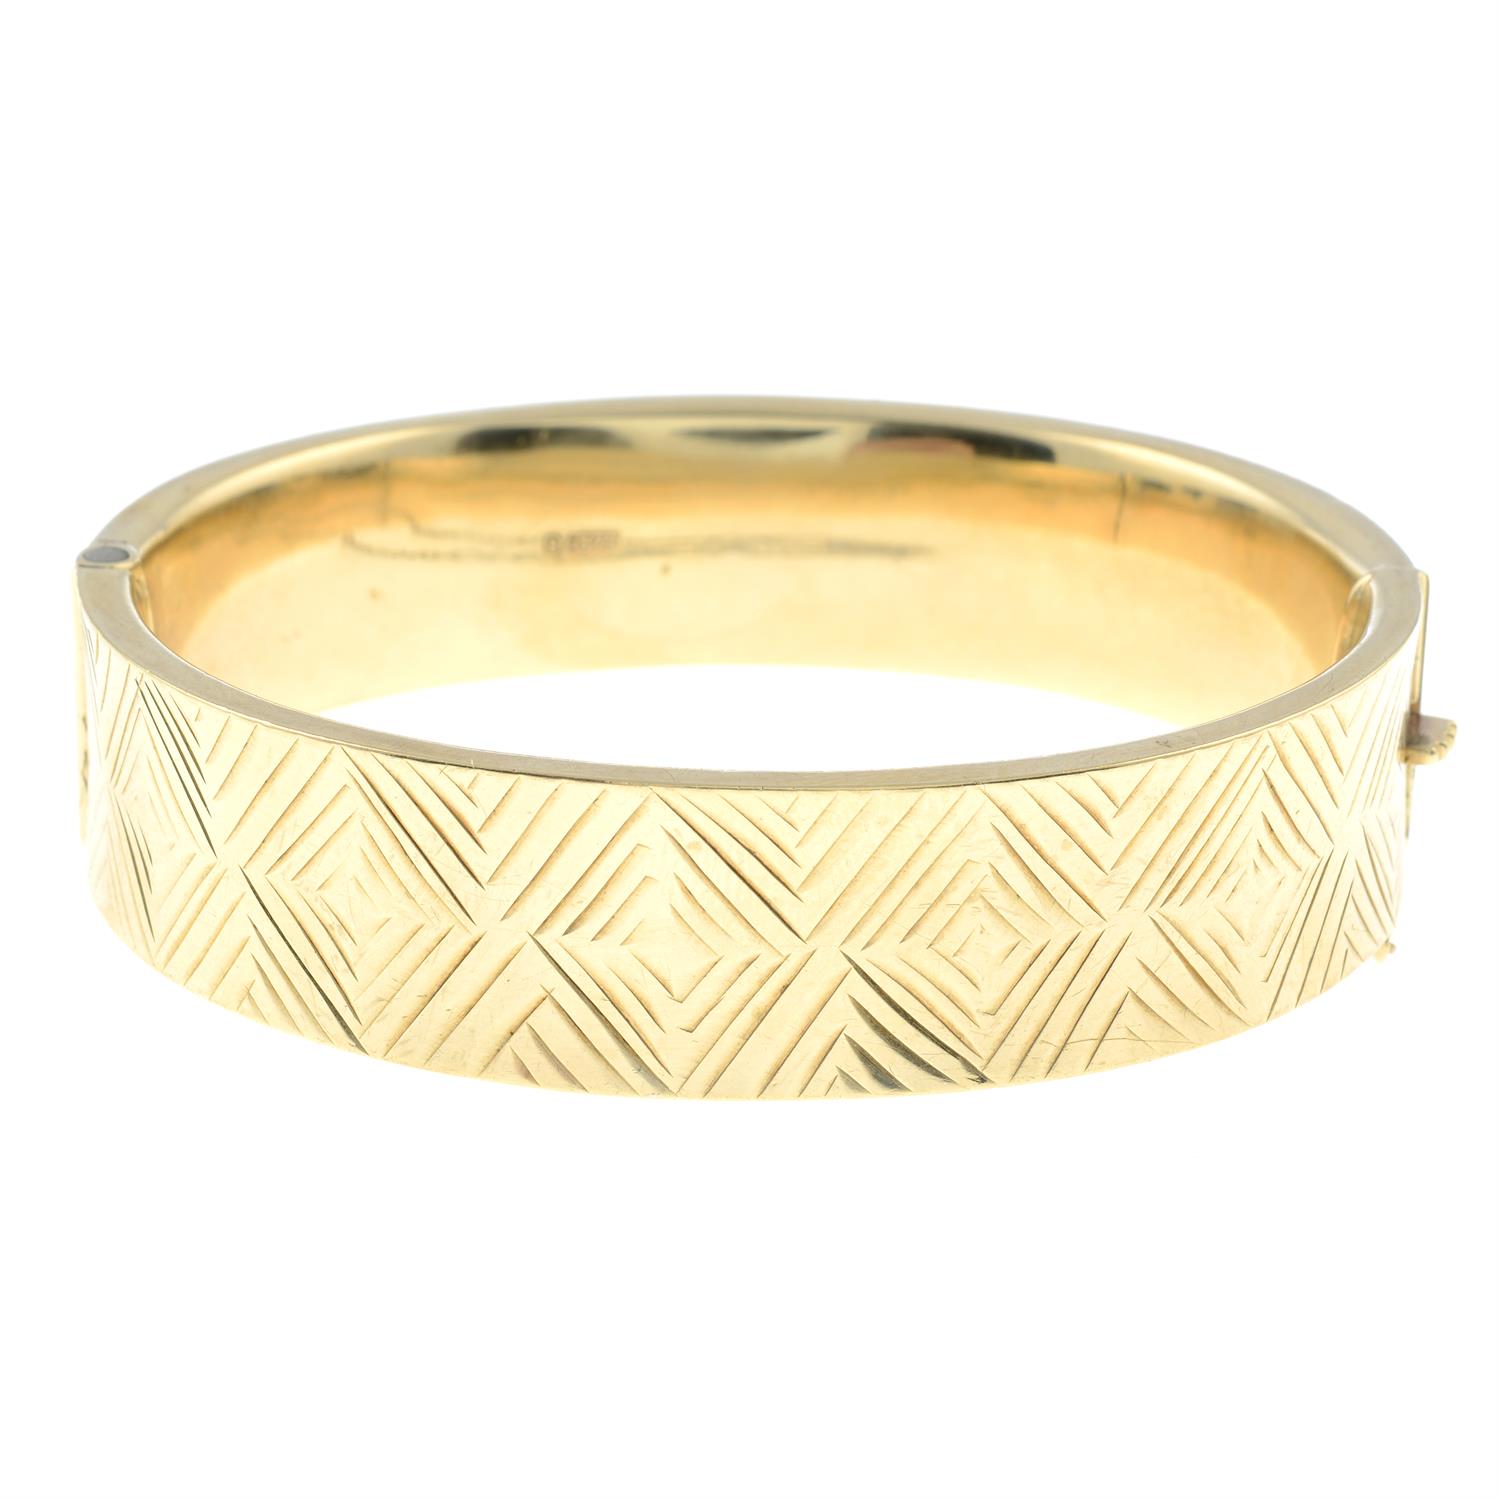 A 9ct gold hinged bangle, with cross motif.